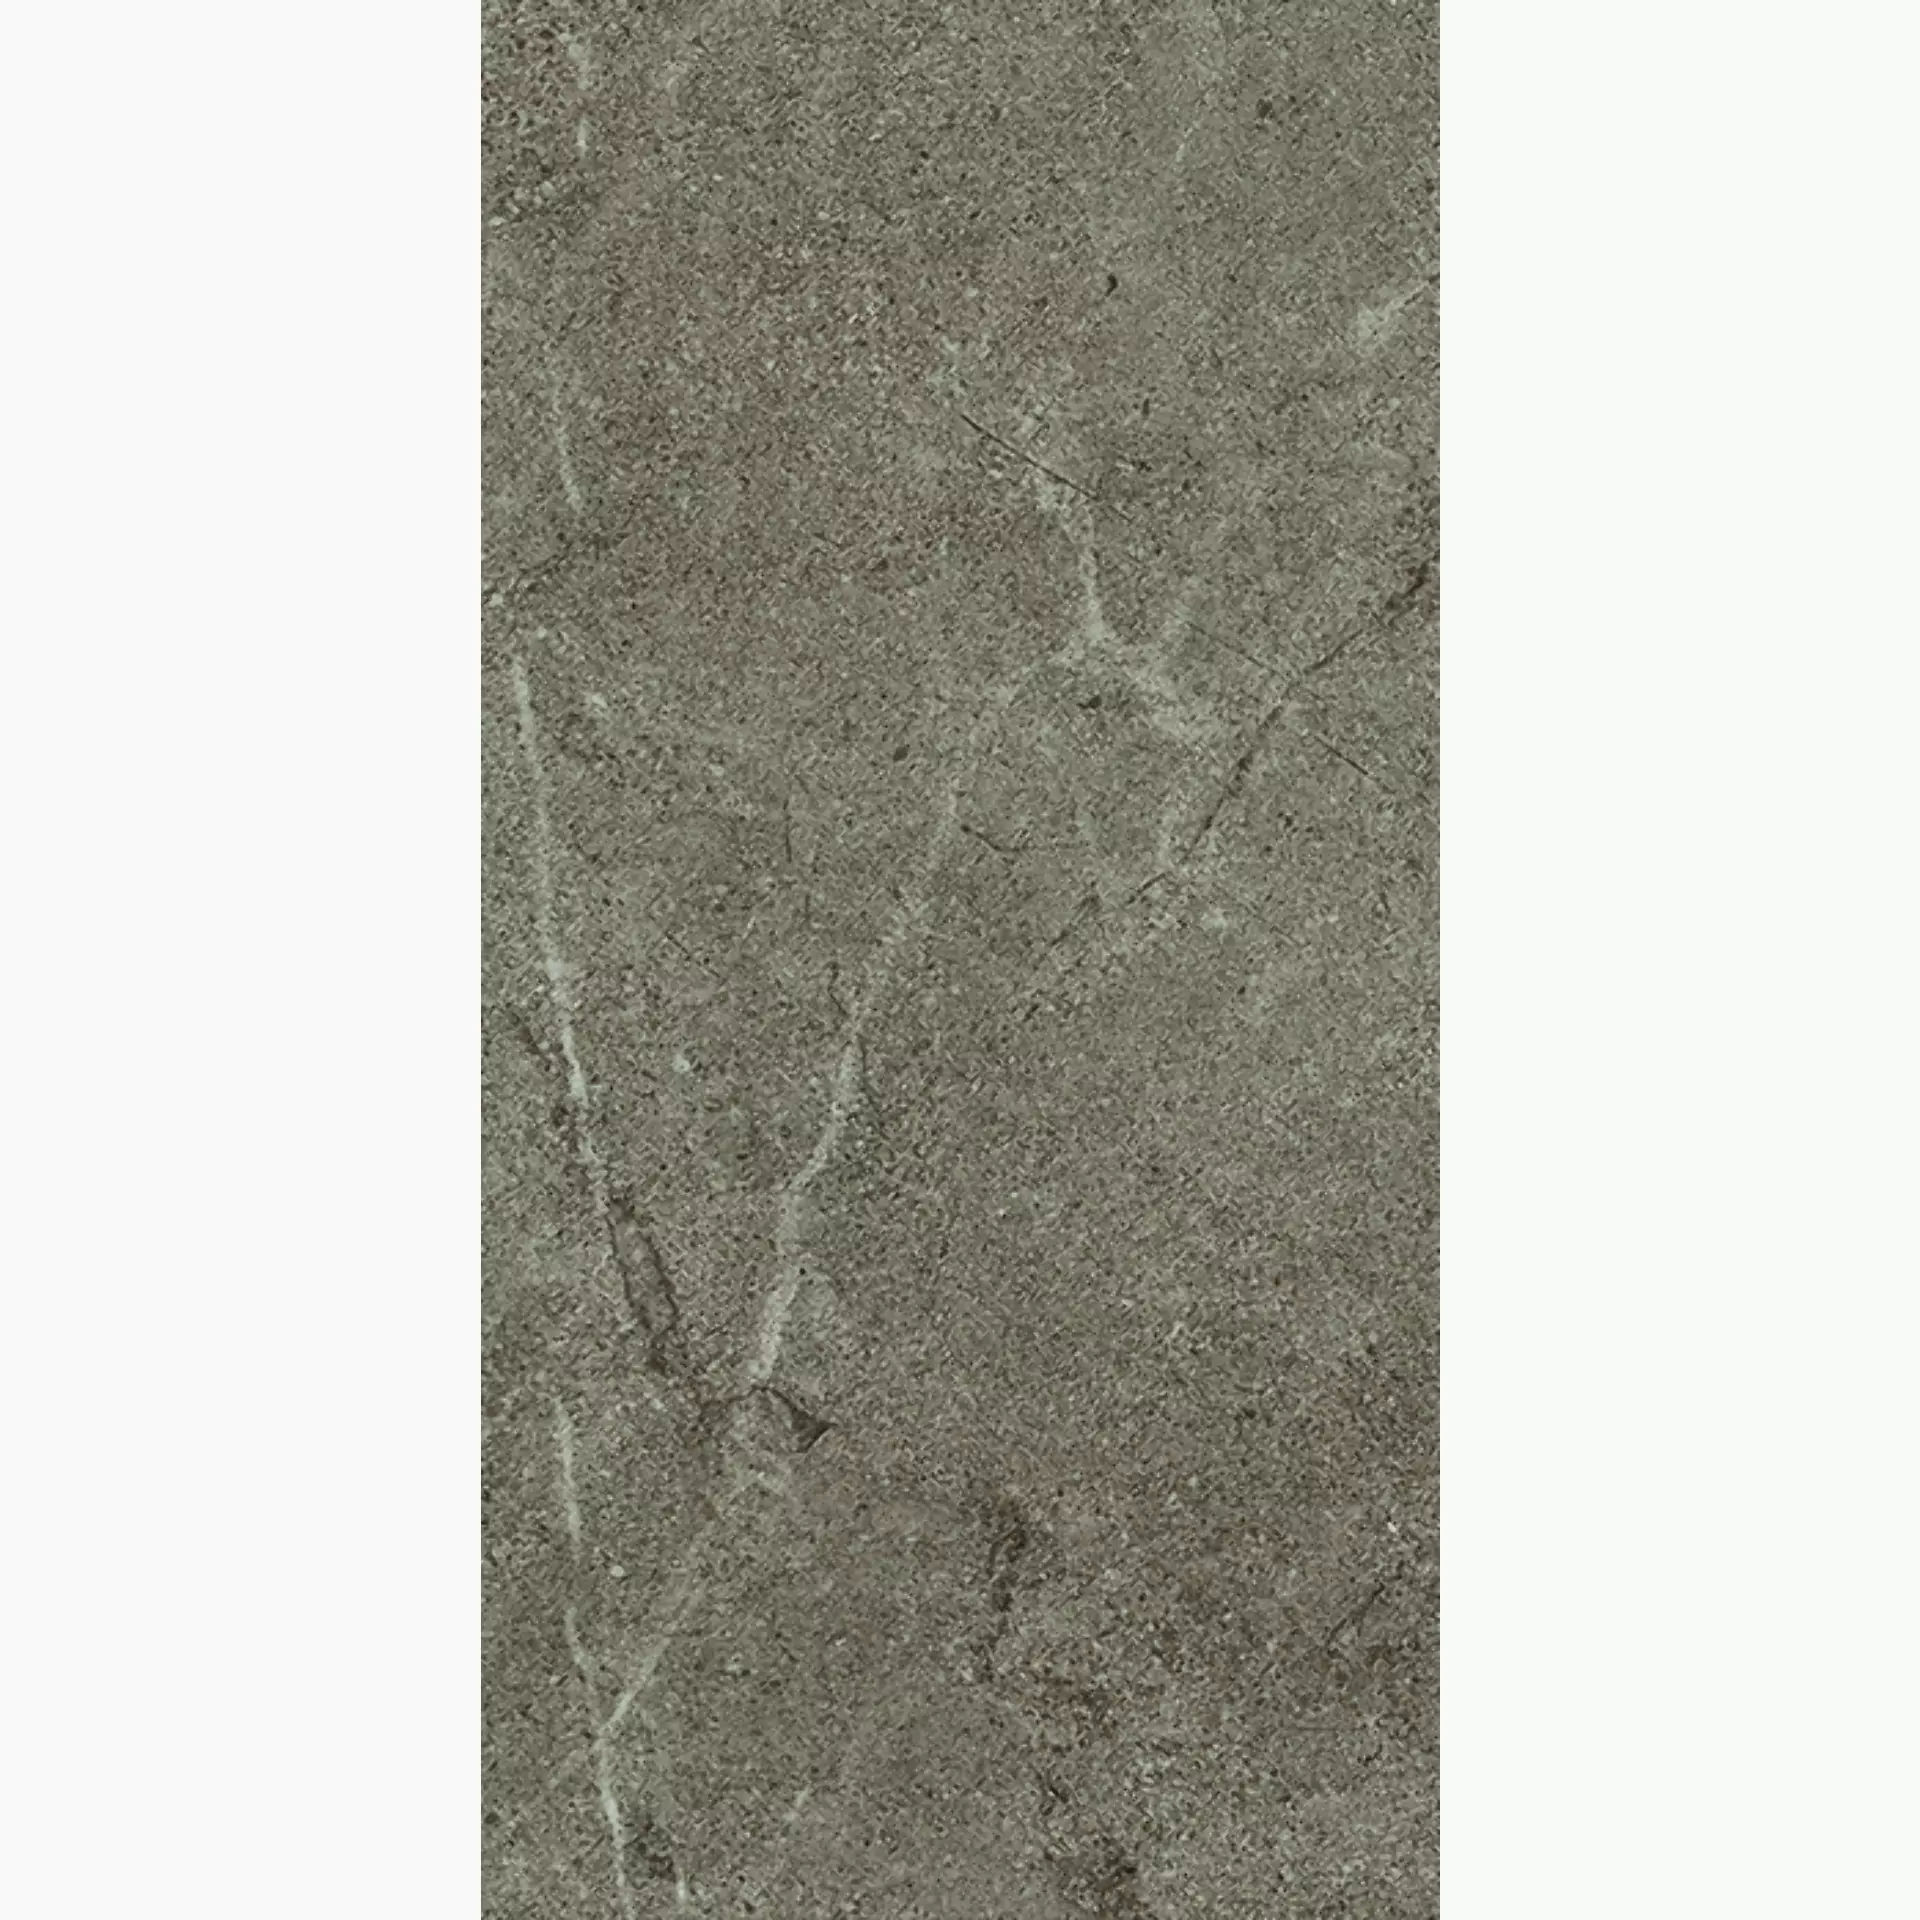 Cercom Archistone Taupe Naturale 1081727 60x120cm rectified 9,5mm